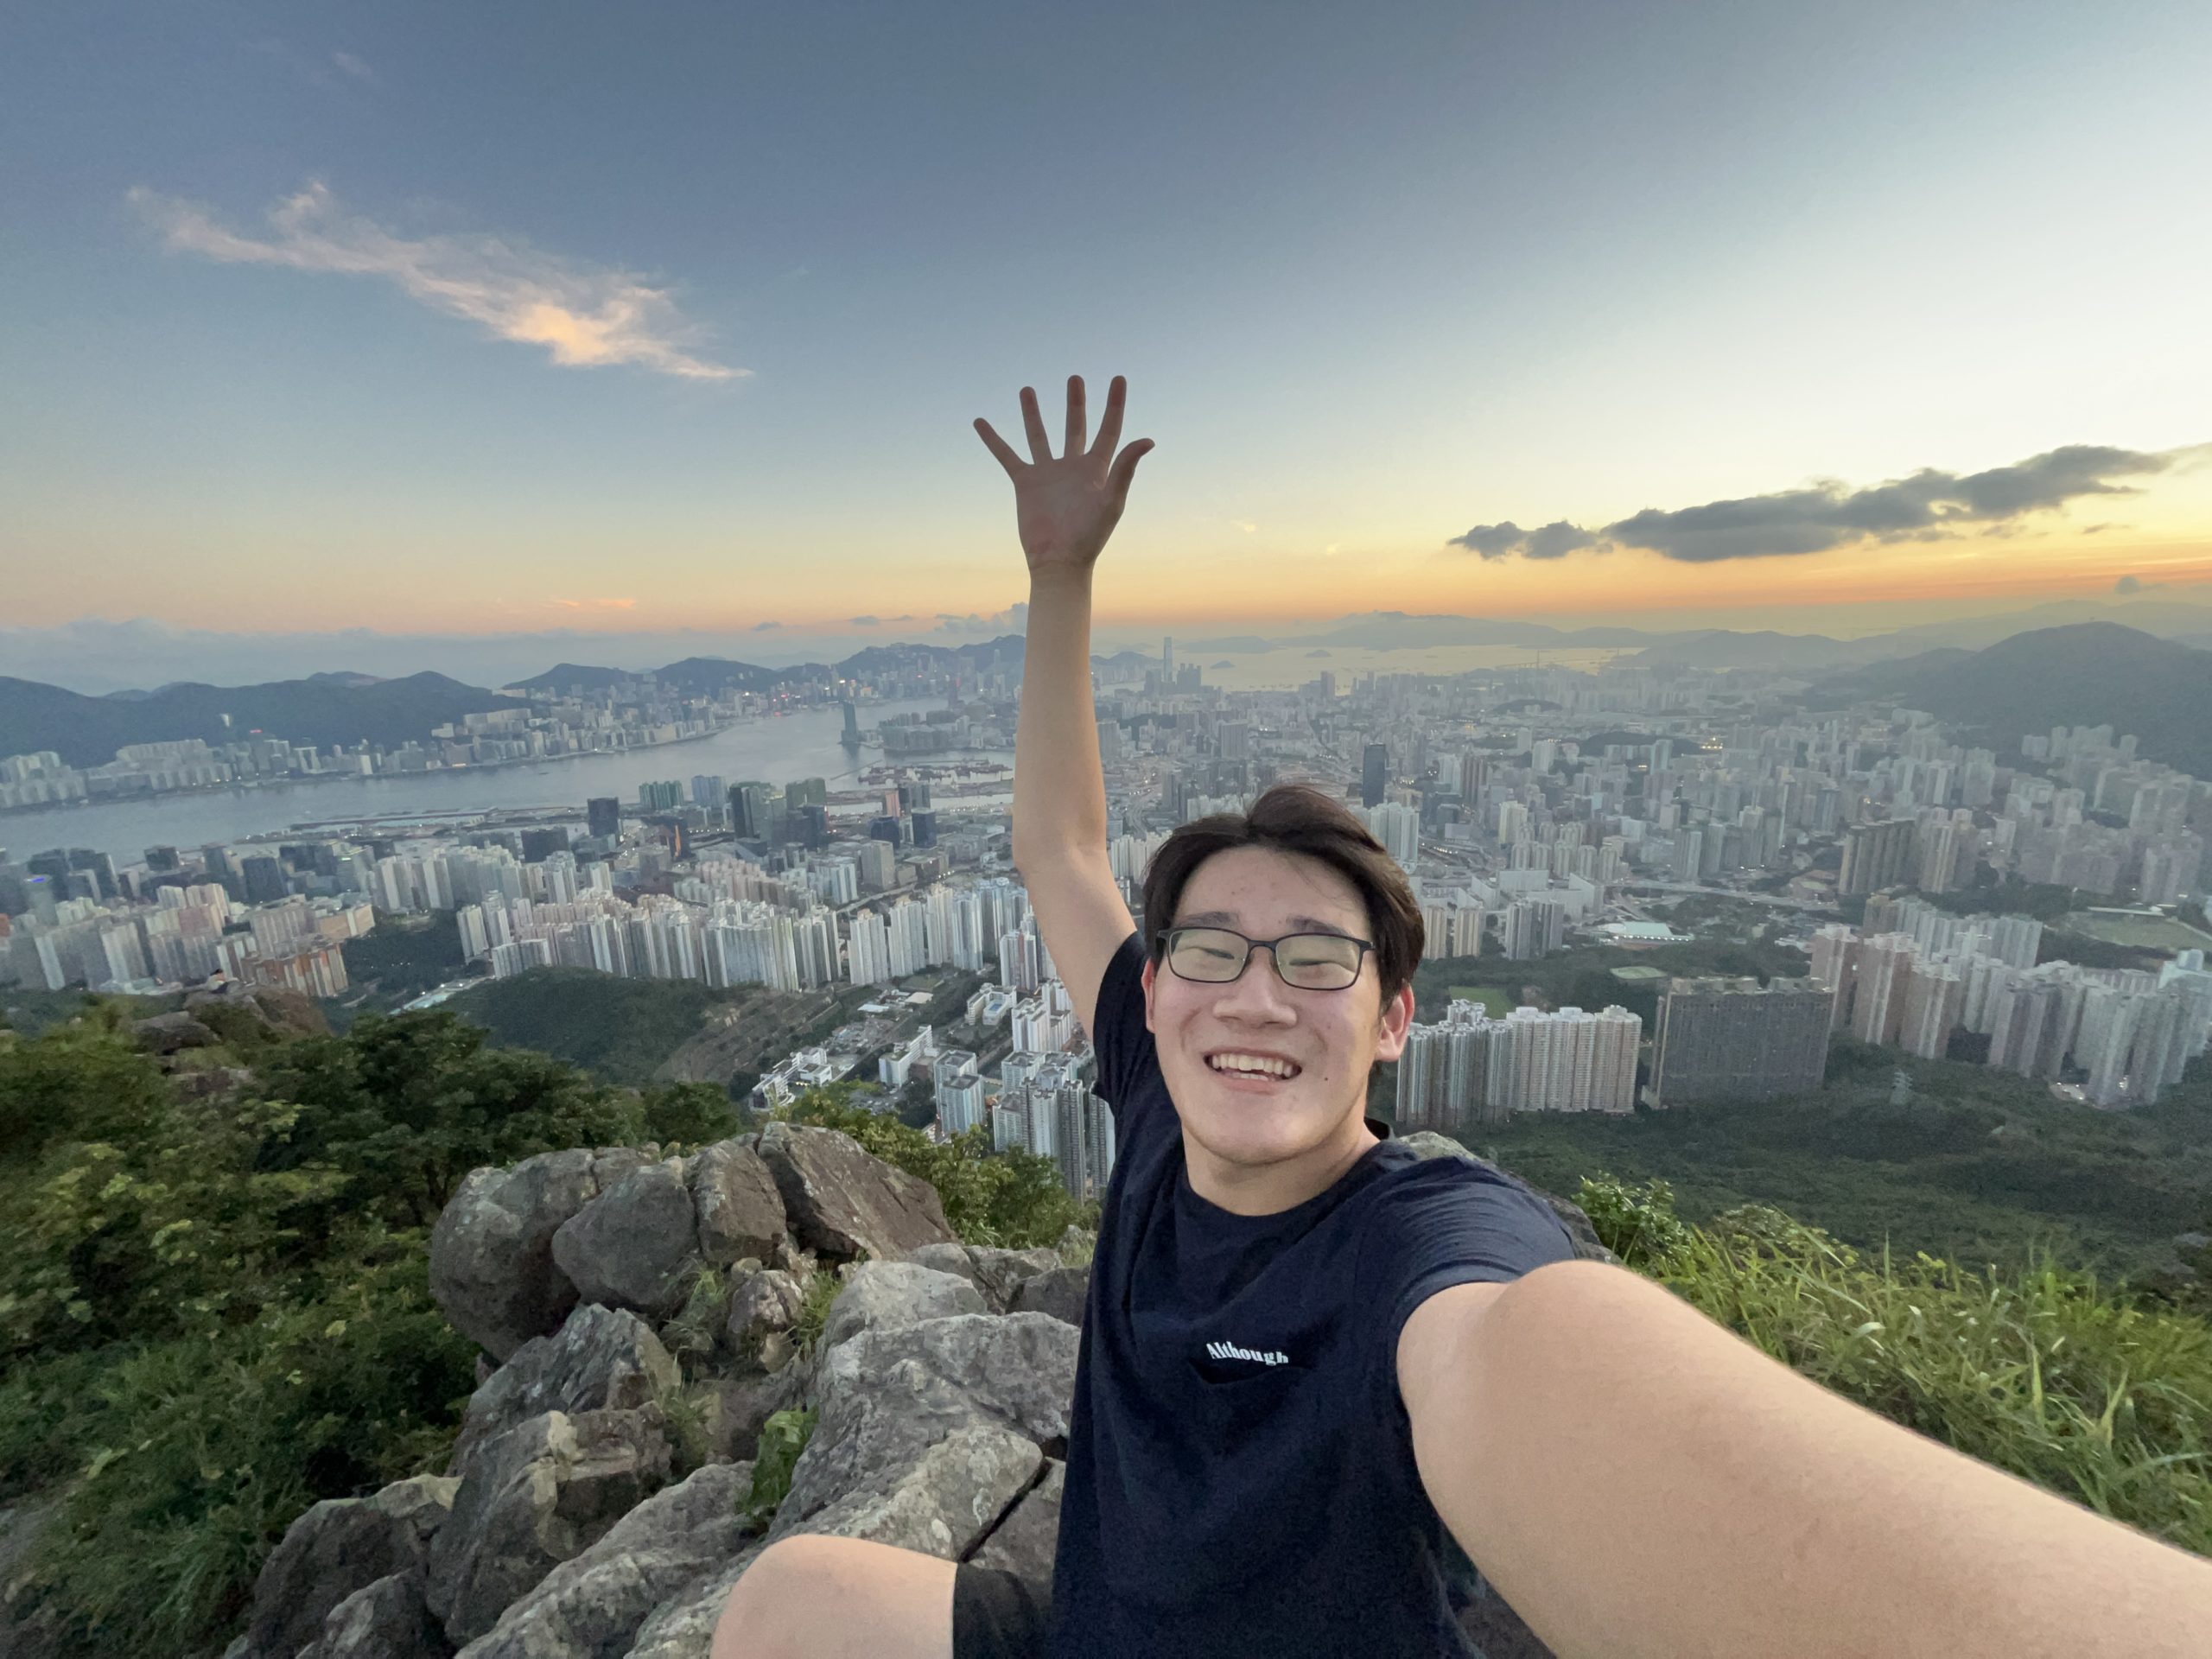 A student does a sic 'em with Hong Kong's skyline in the background